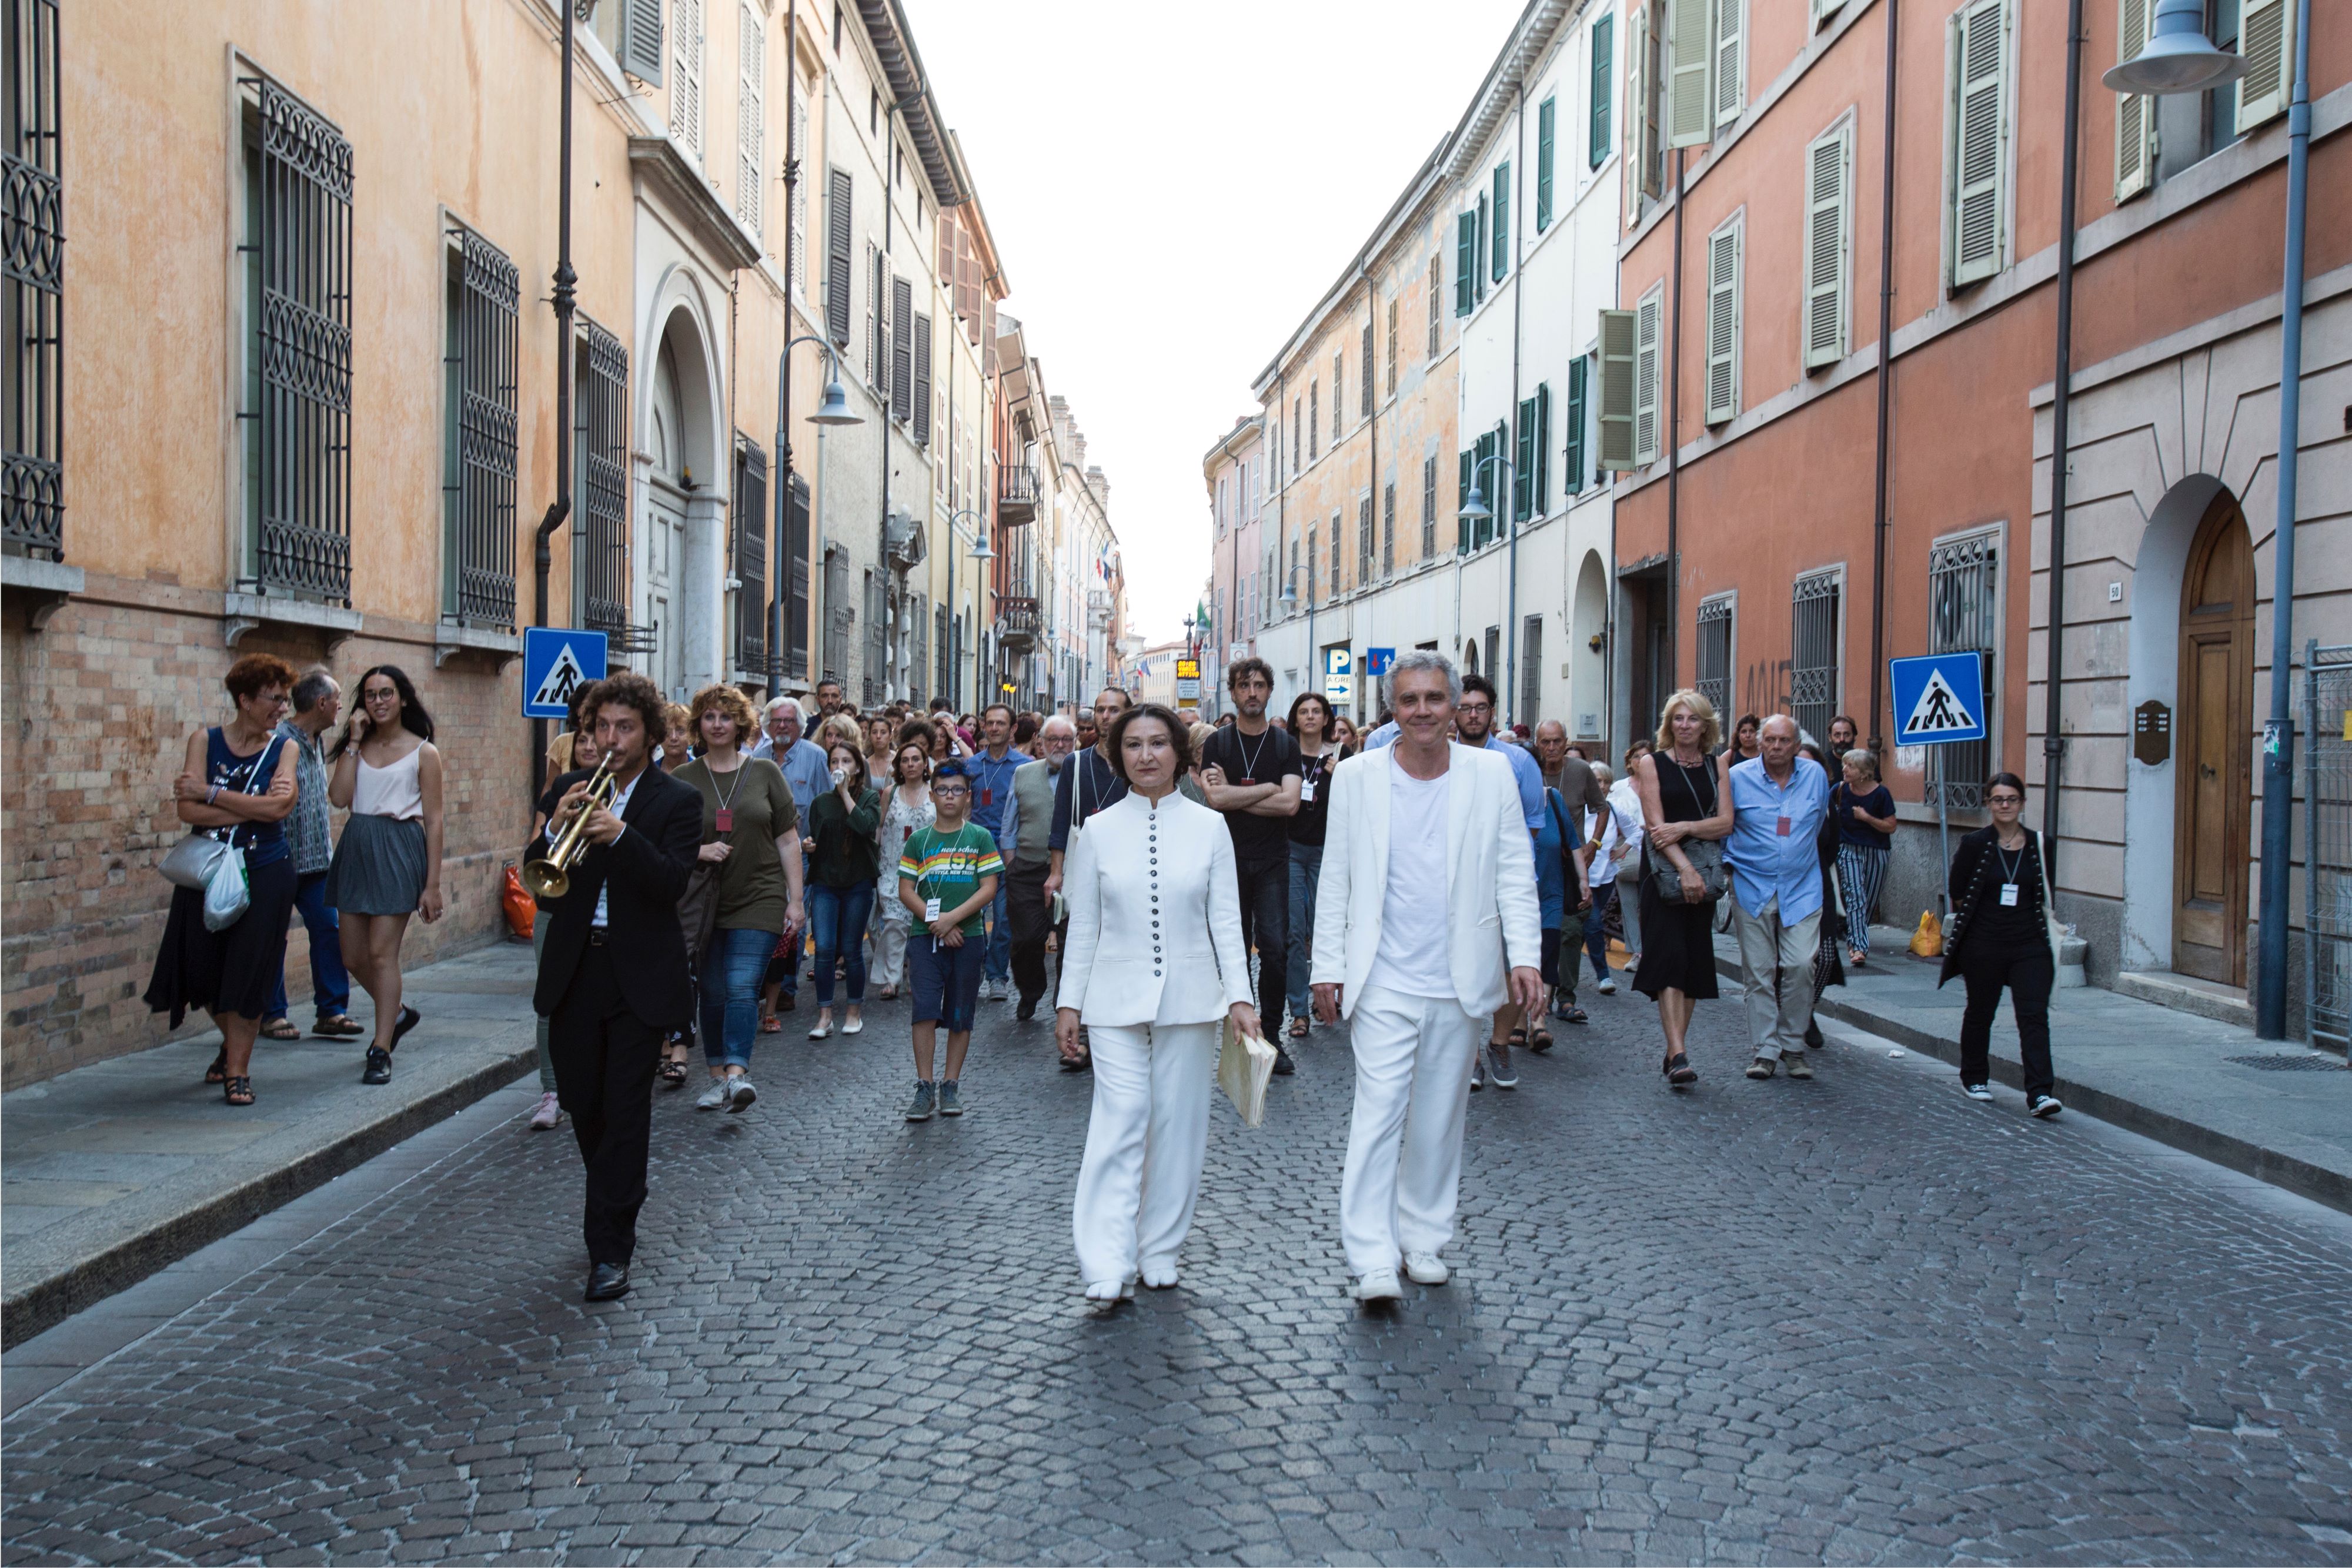 Two people dressed in white lead a procession through an Italian city street